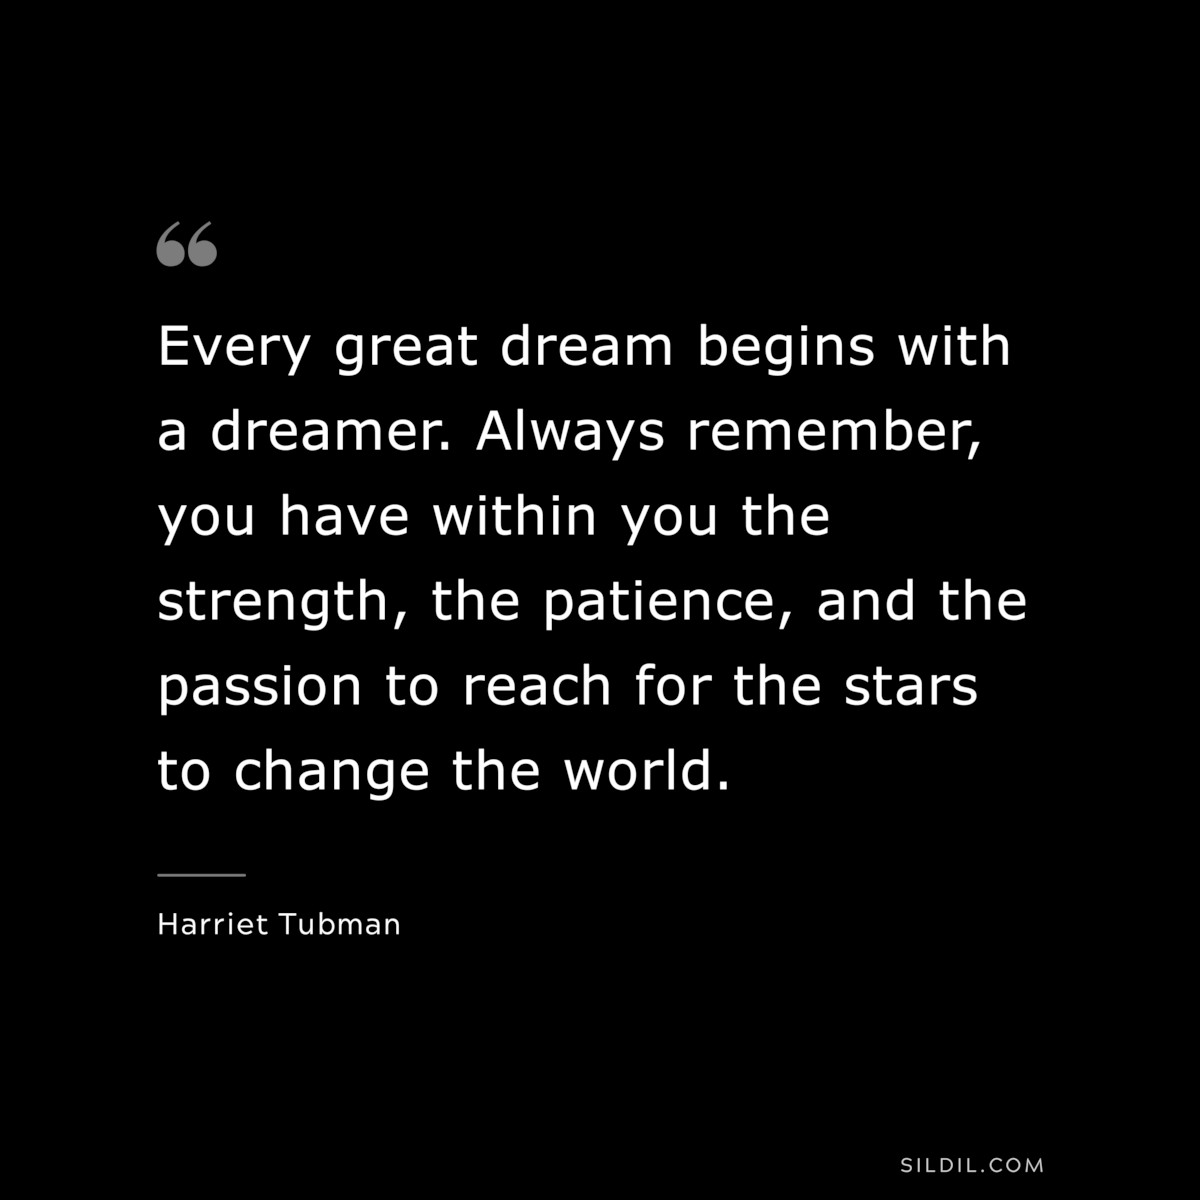 Every great dream begins with a dreamer. Always remember, you have within you the strength, the patience, and the passion to reach for the stars to change the world. ― Harriet Tubman